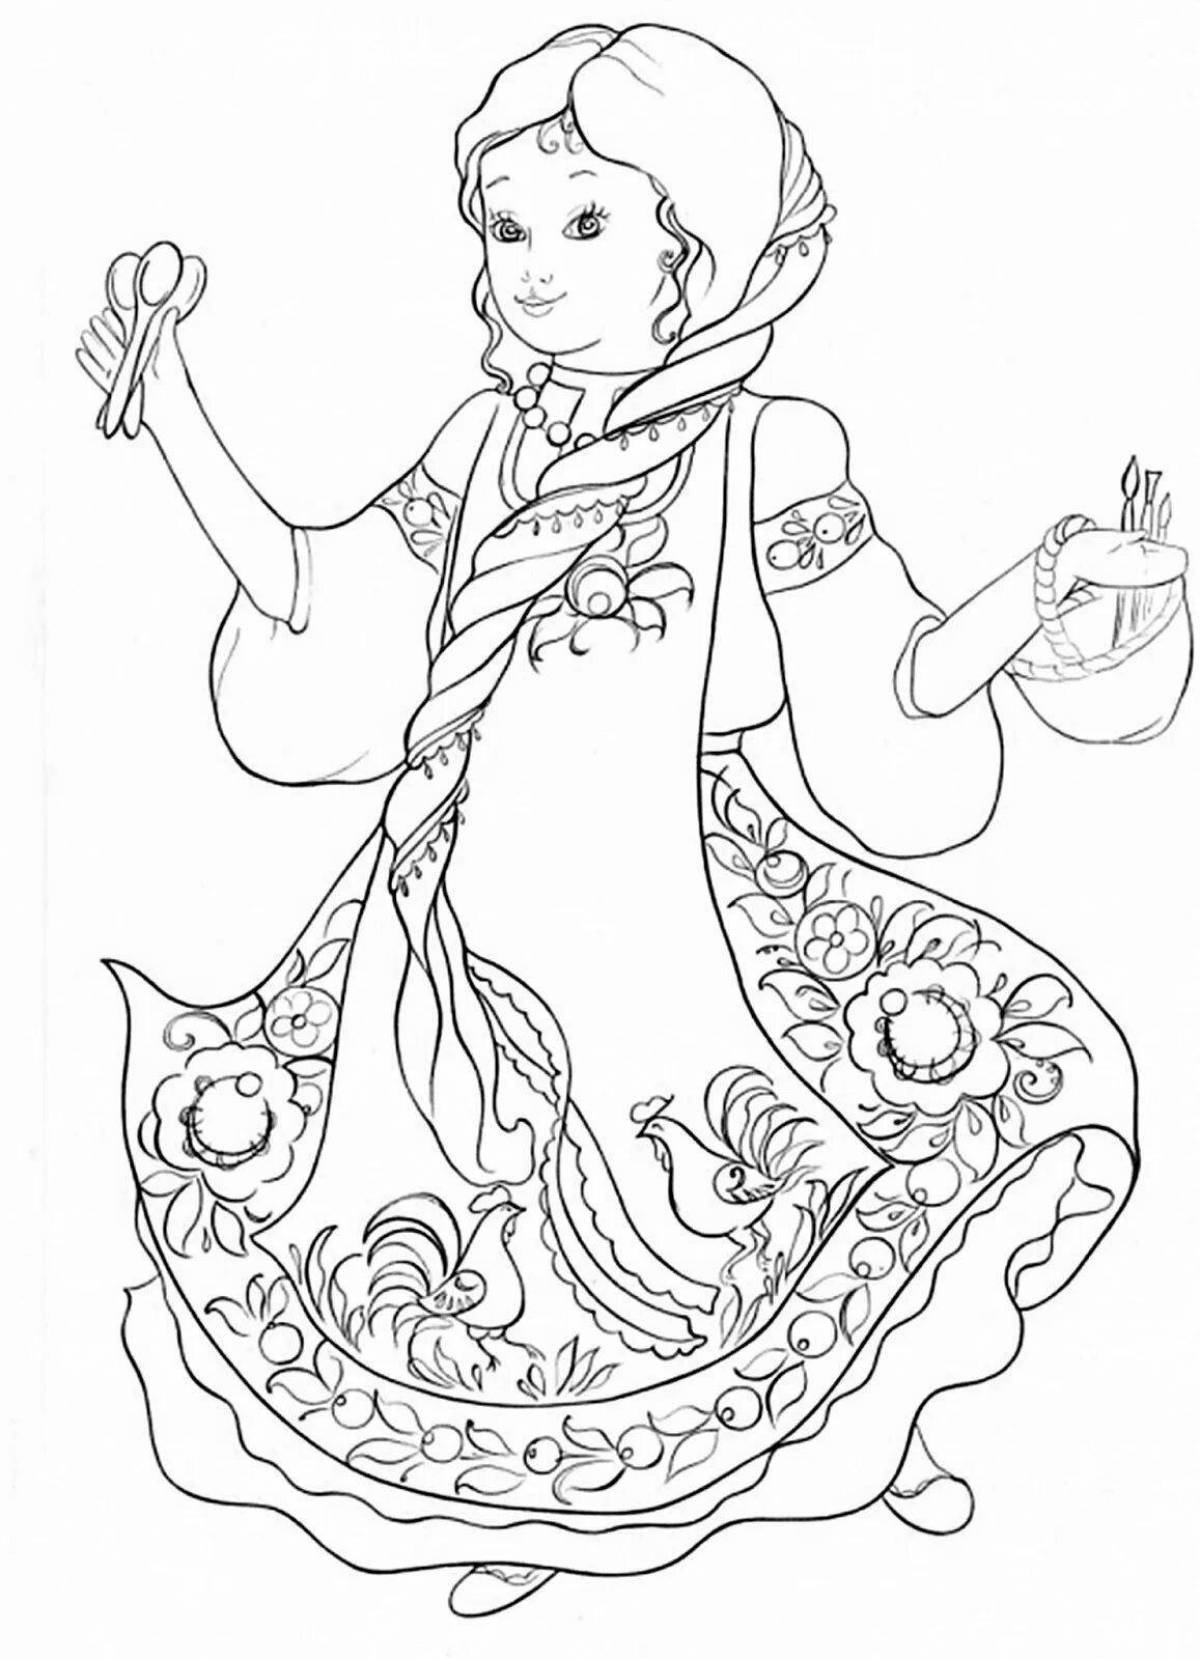 Fun Bazhov coloring book for kids